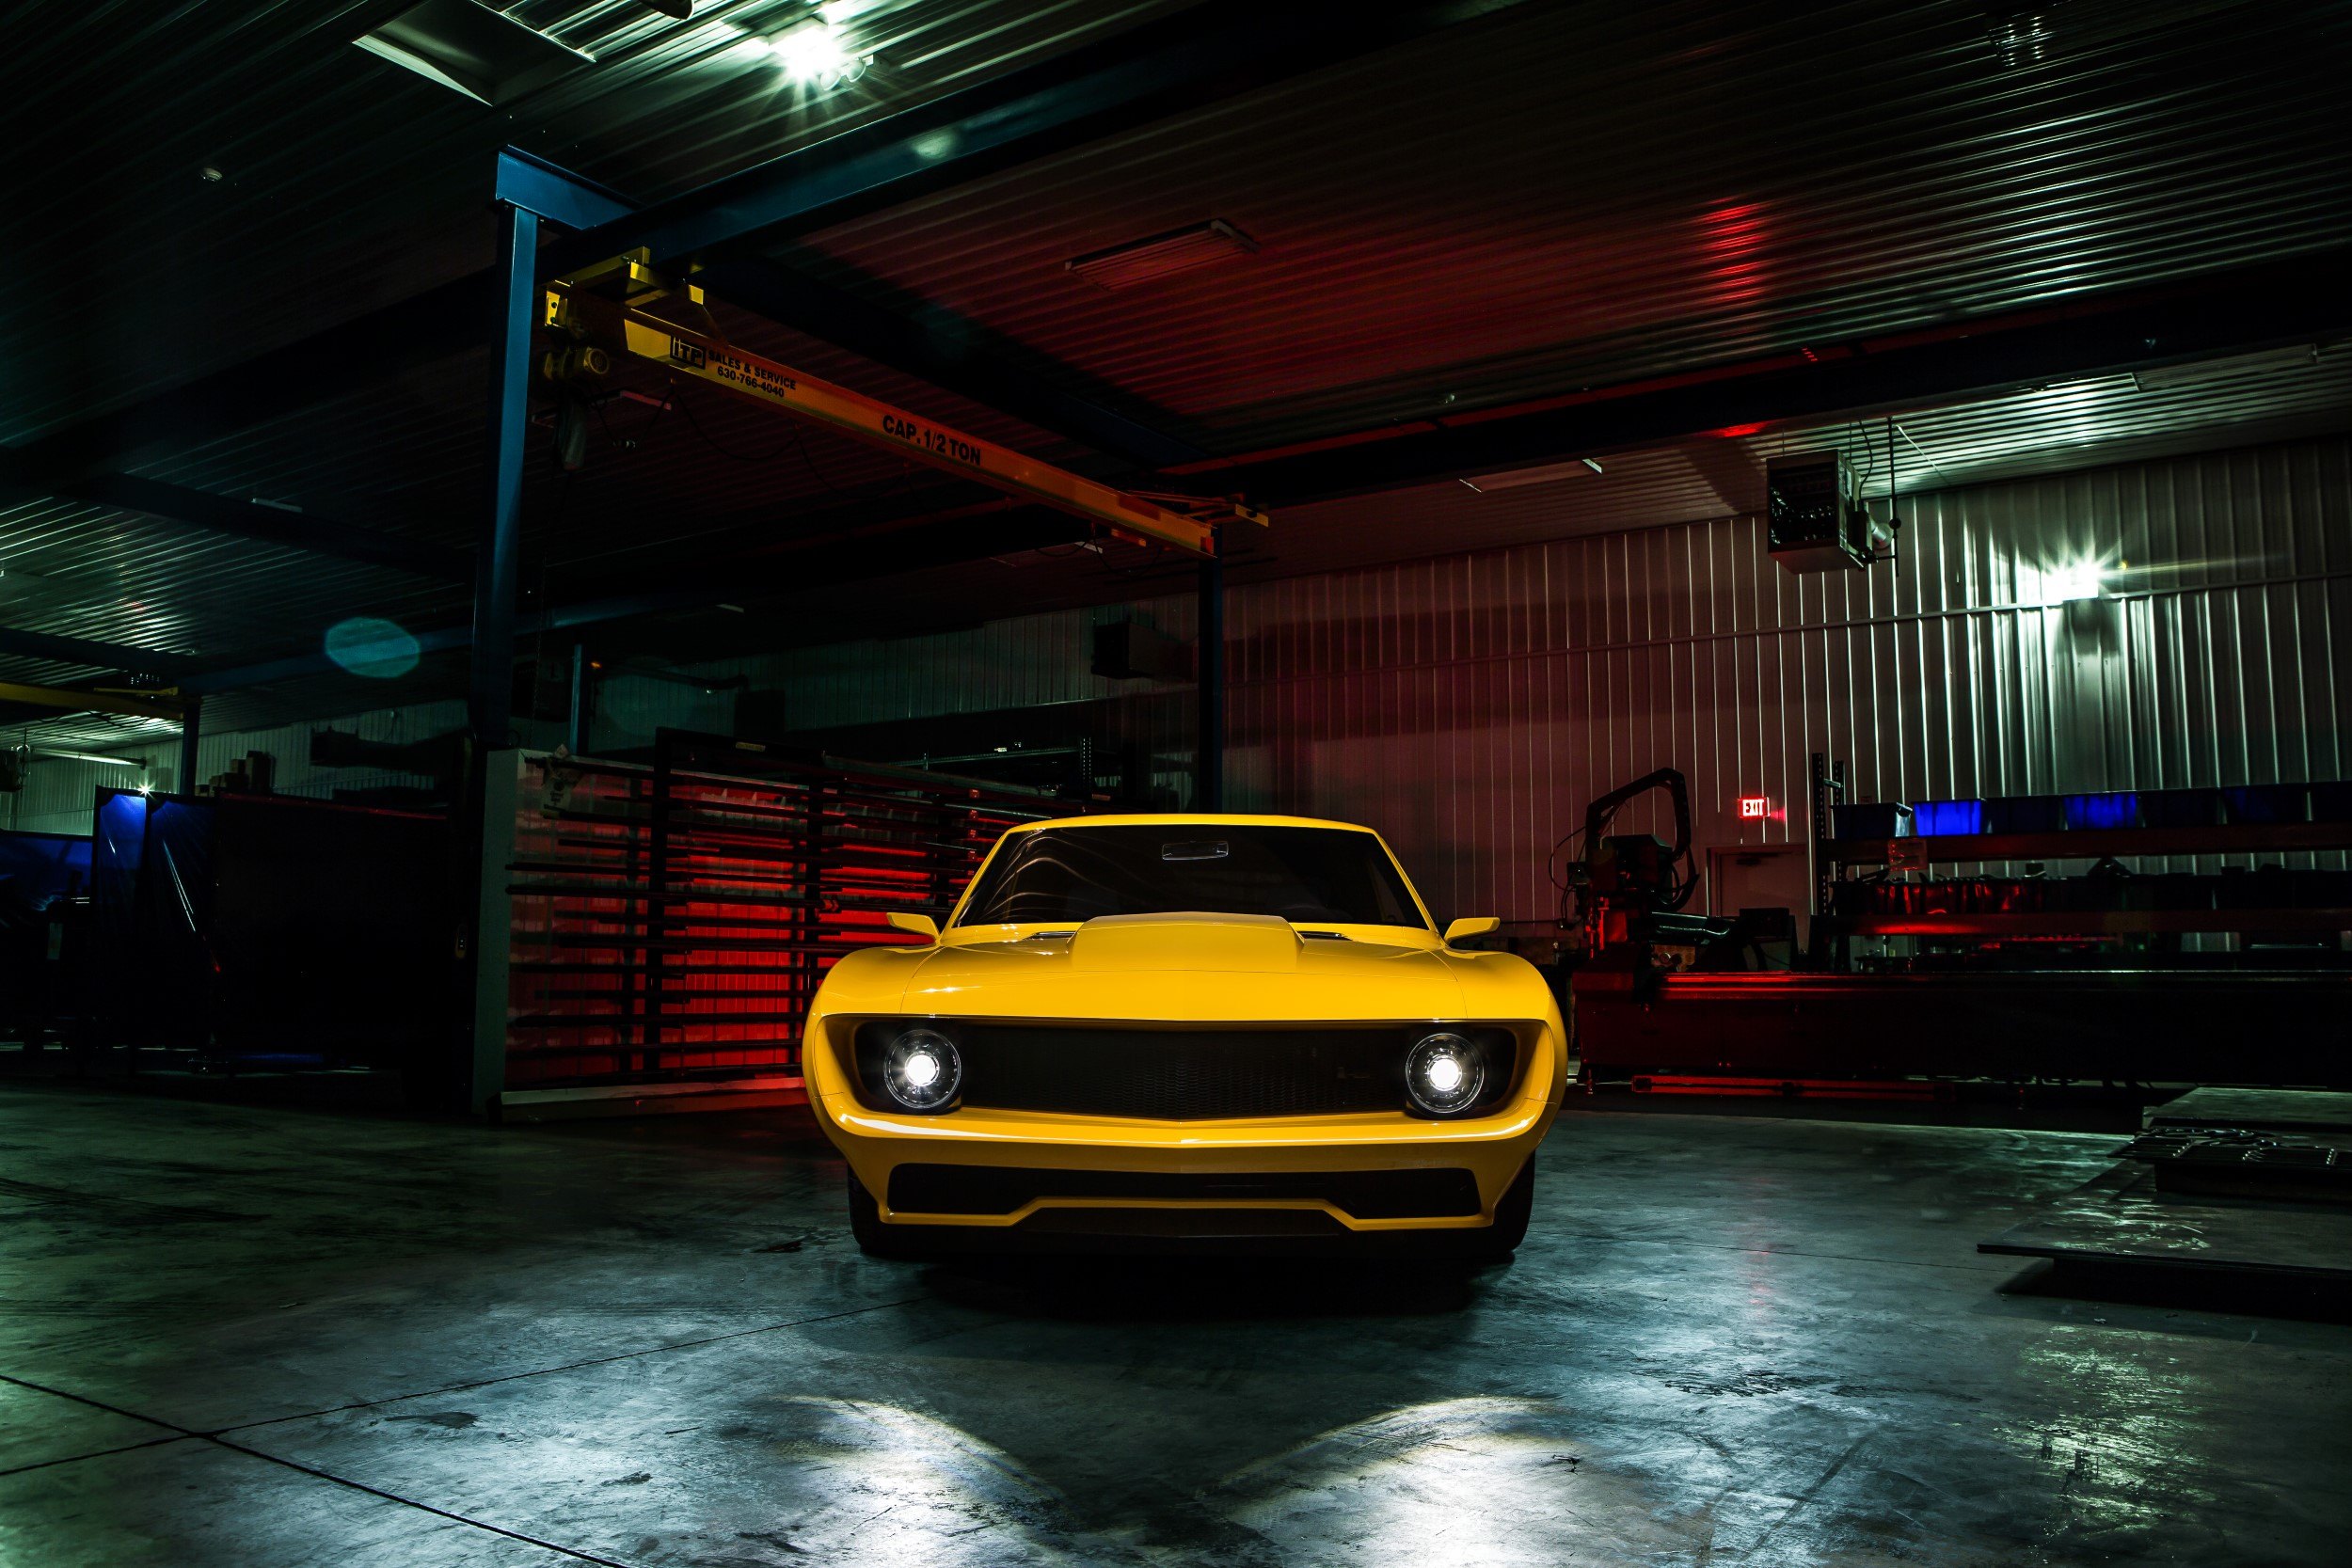 Aftermarket Front Bumper on Yellow Chevy Camaro - Photo by Roadster Shop